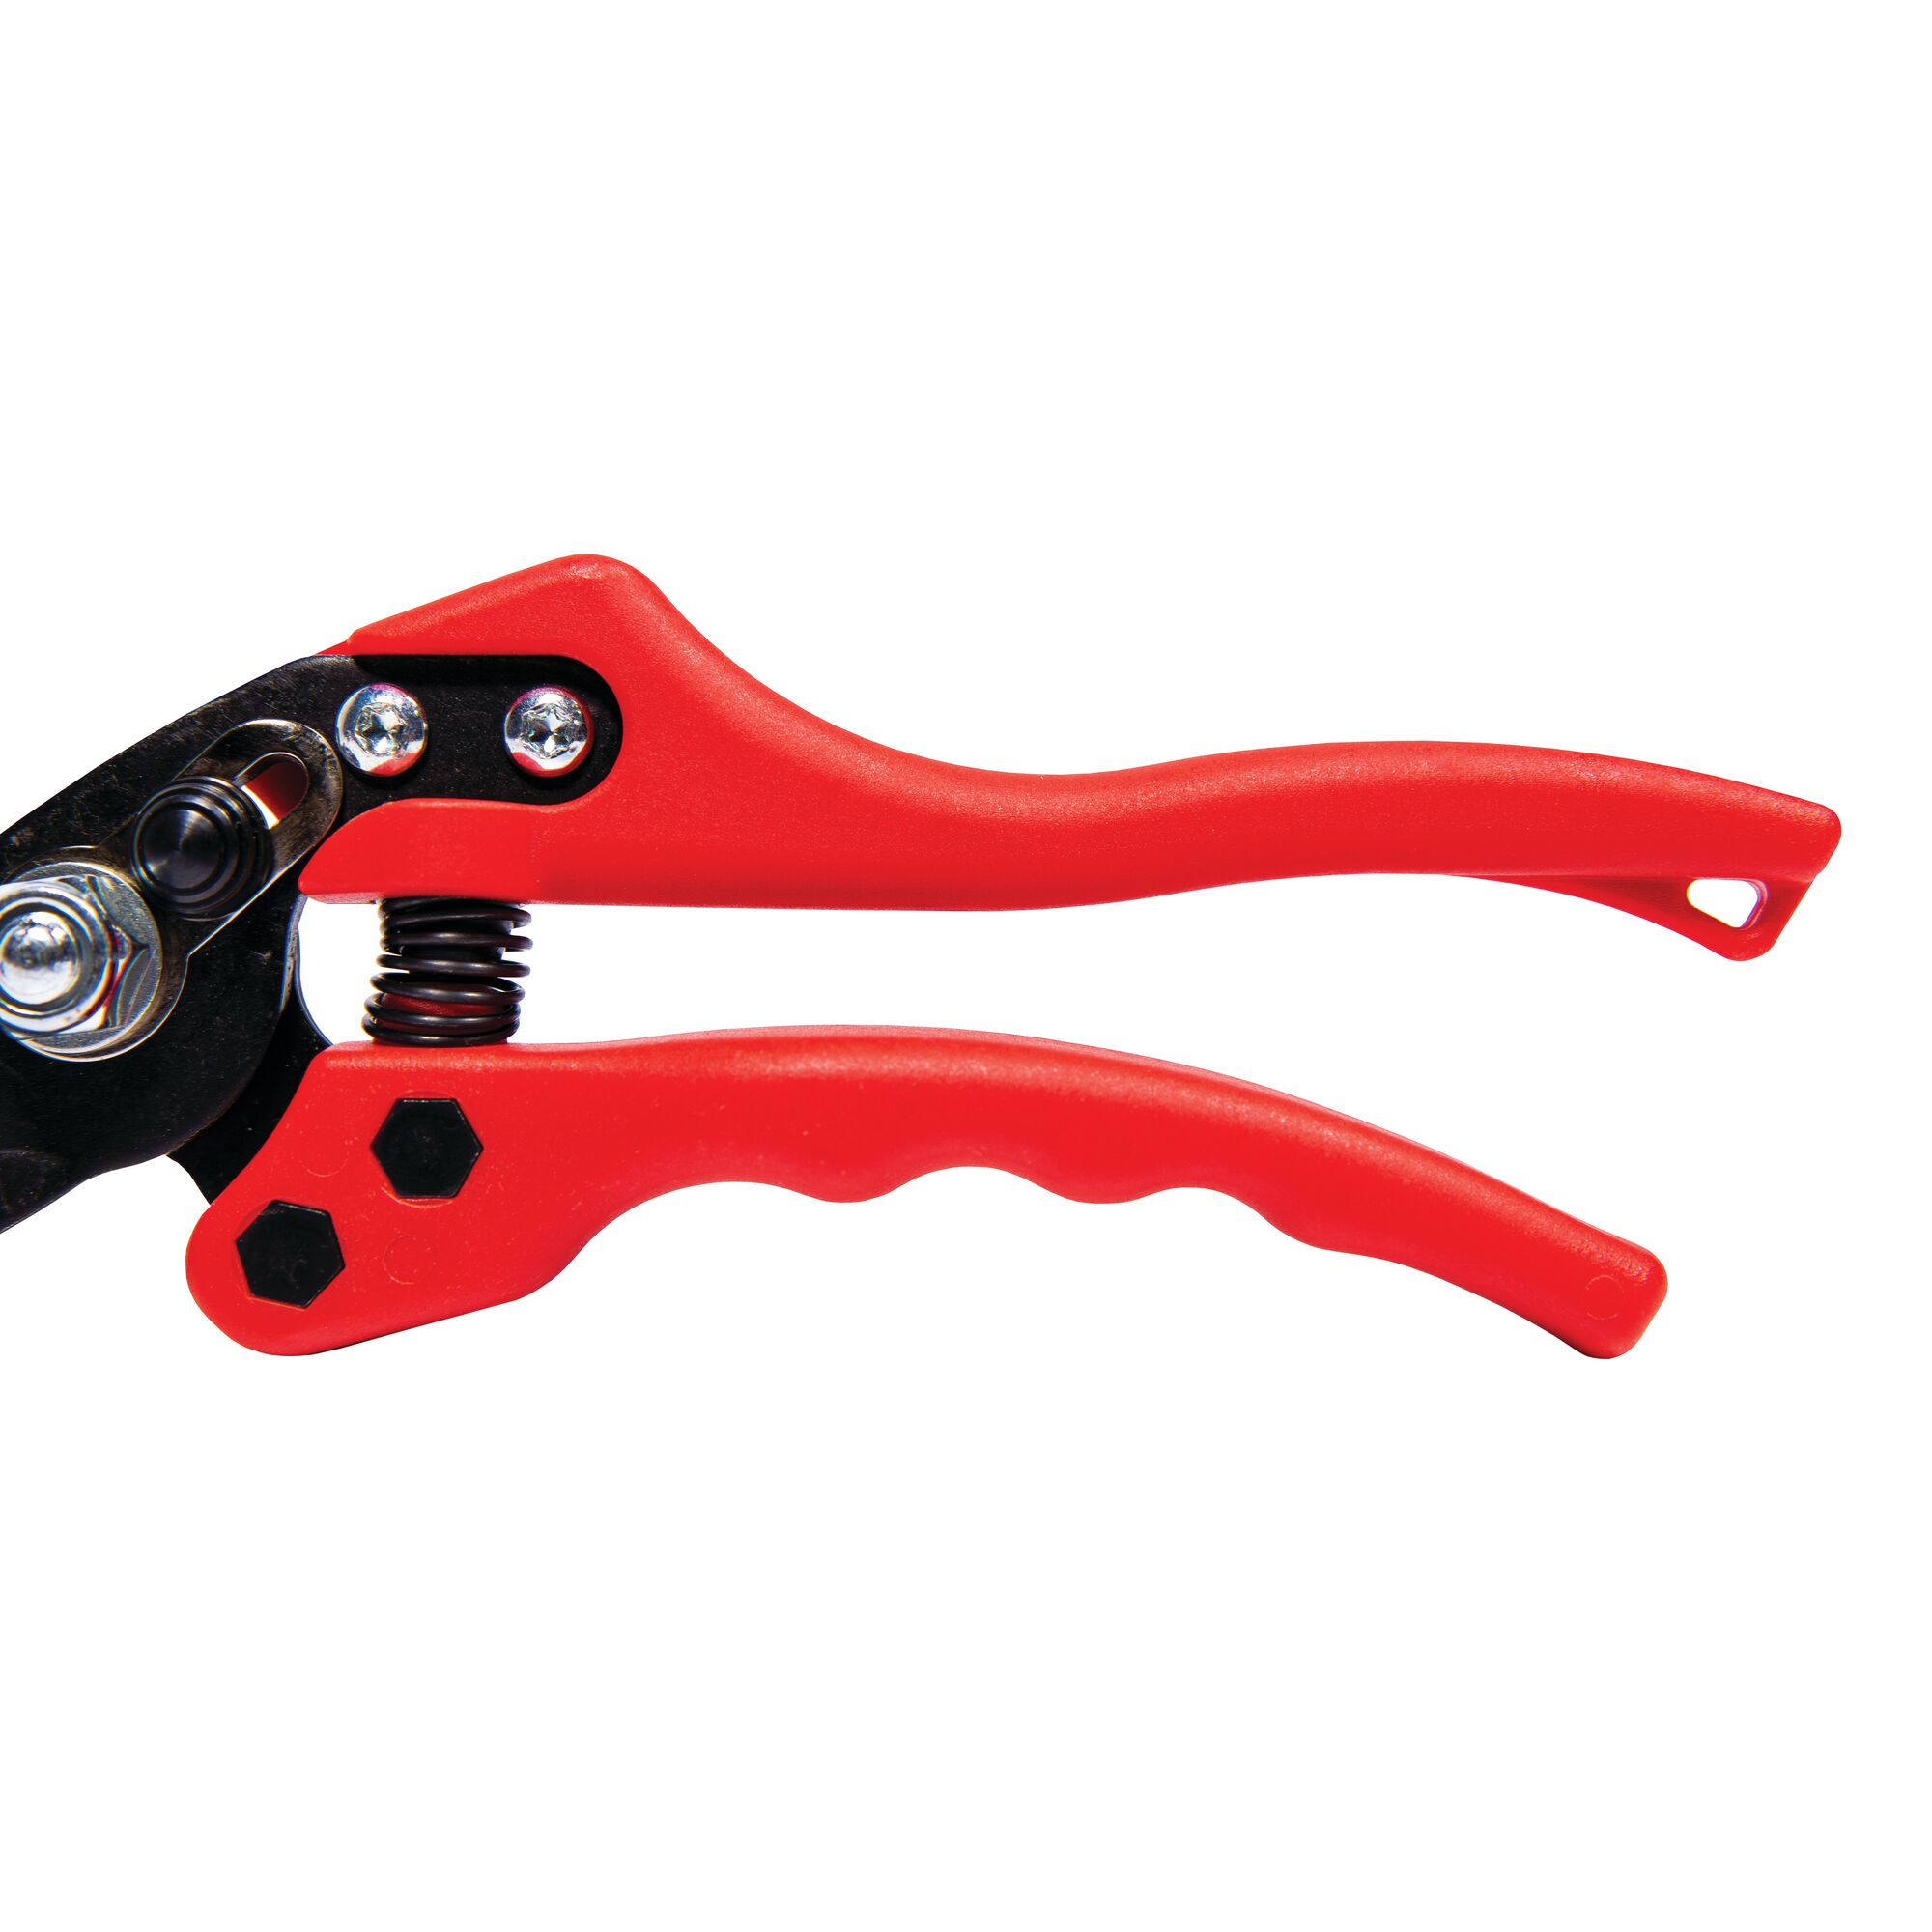 Non-stick blade coating feature of bypass pruner.